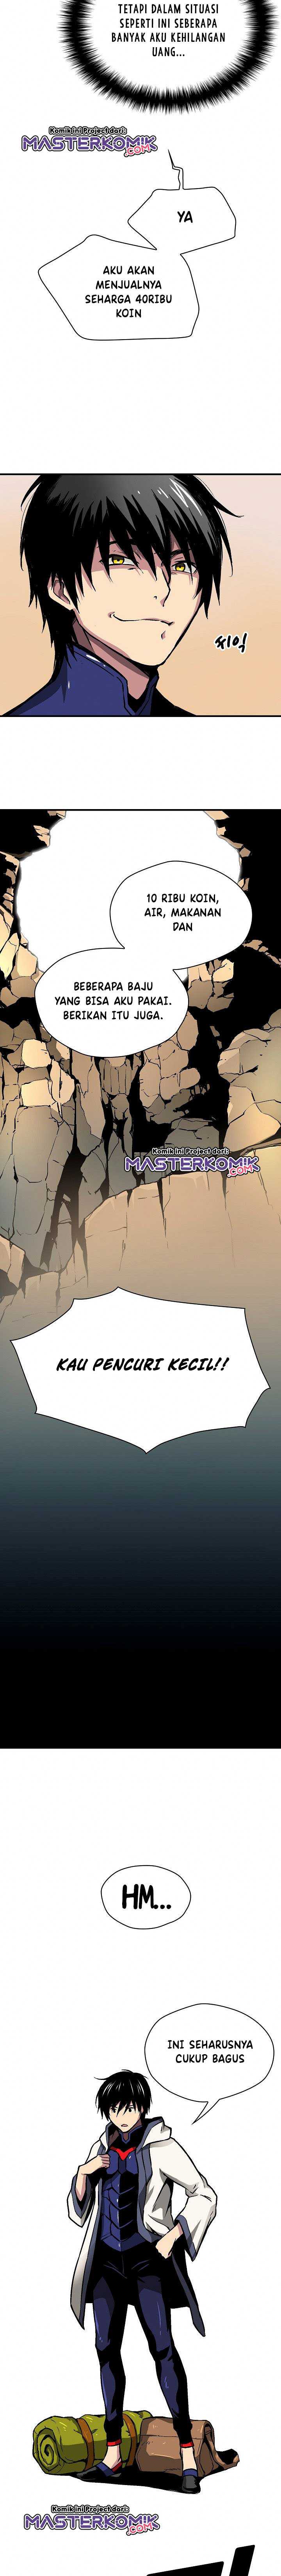 Unbreakable Chapter 18 bahsa indonesia